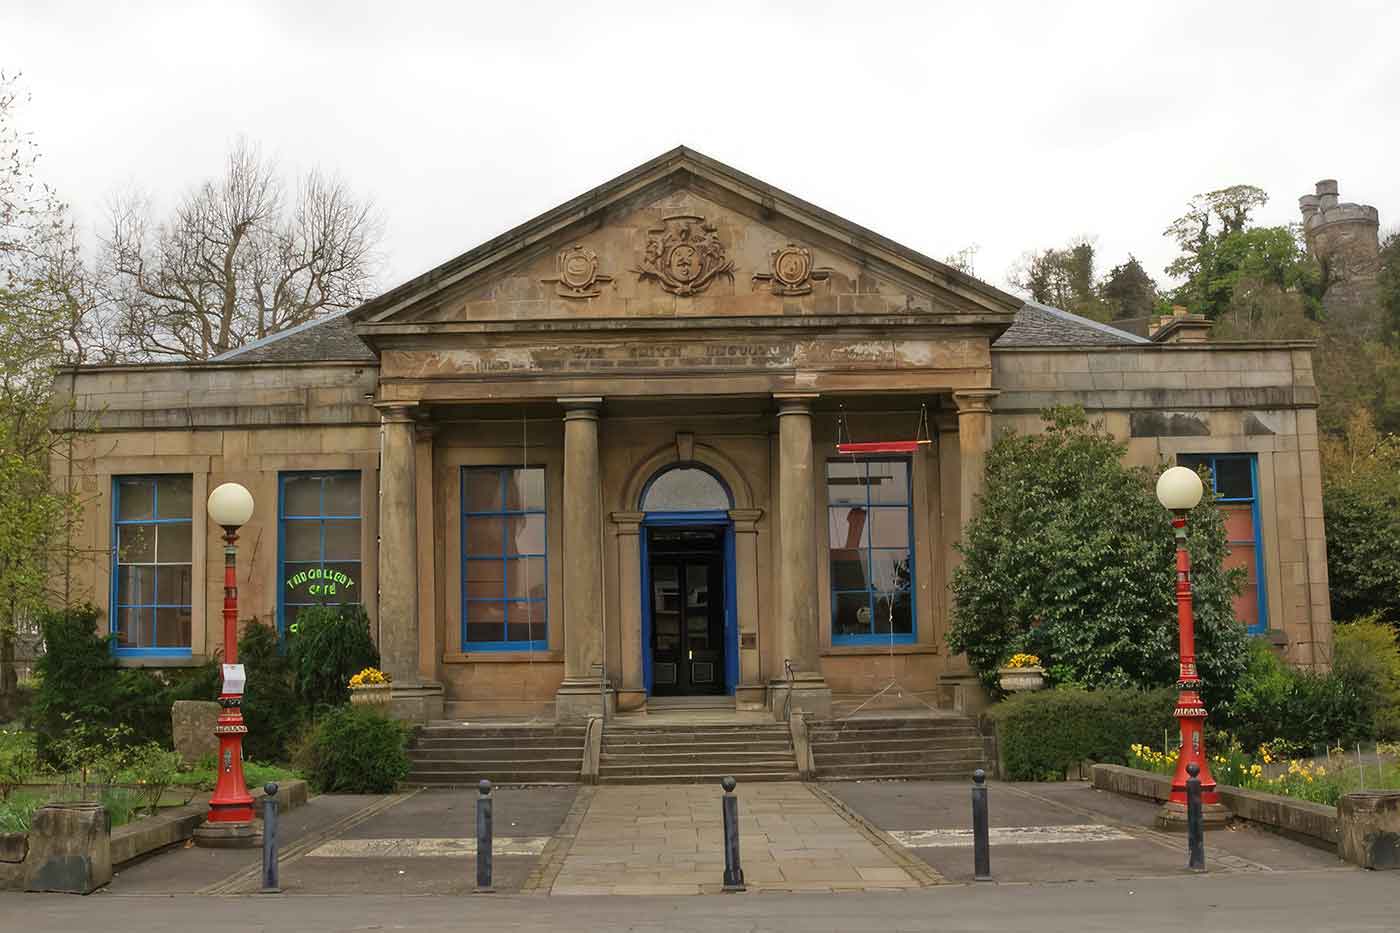 Stirling Smith Art Gallery and Museum